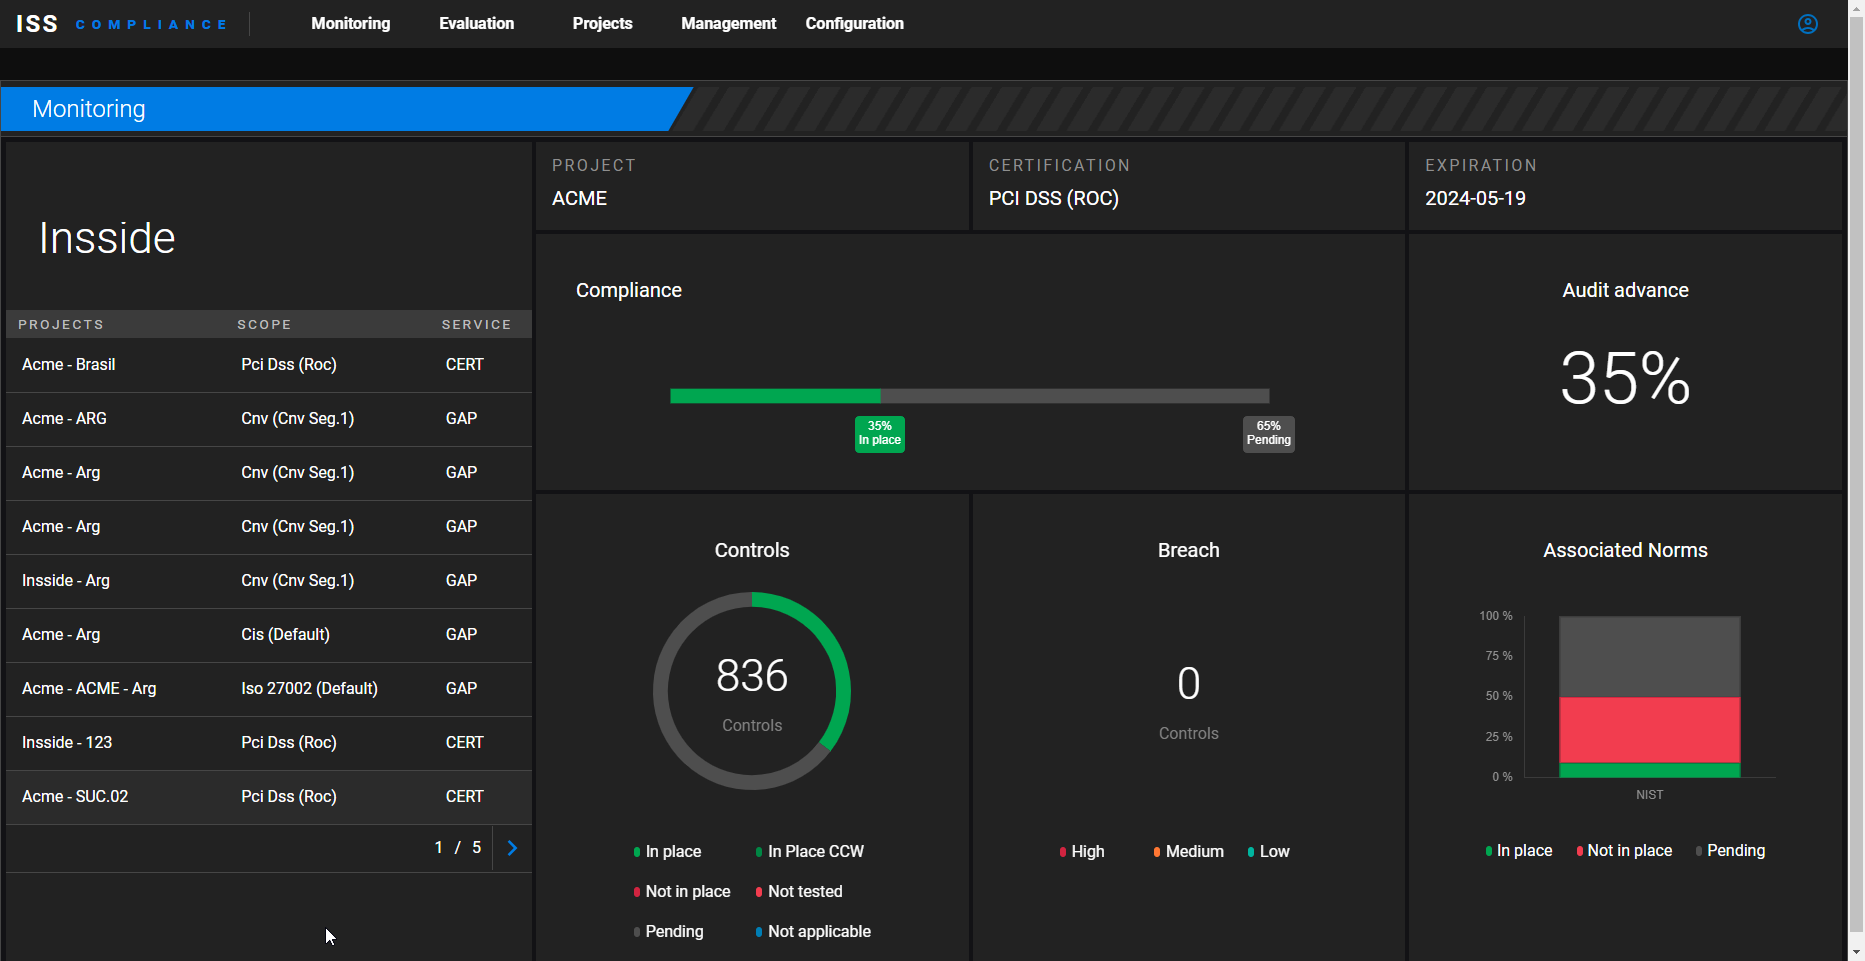 Our dashboard provides a complete visualization that includes compliance, audit progress, regulatory controls, their status, the criticality of the broken controls, the associated regulations and their progress.